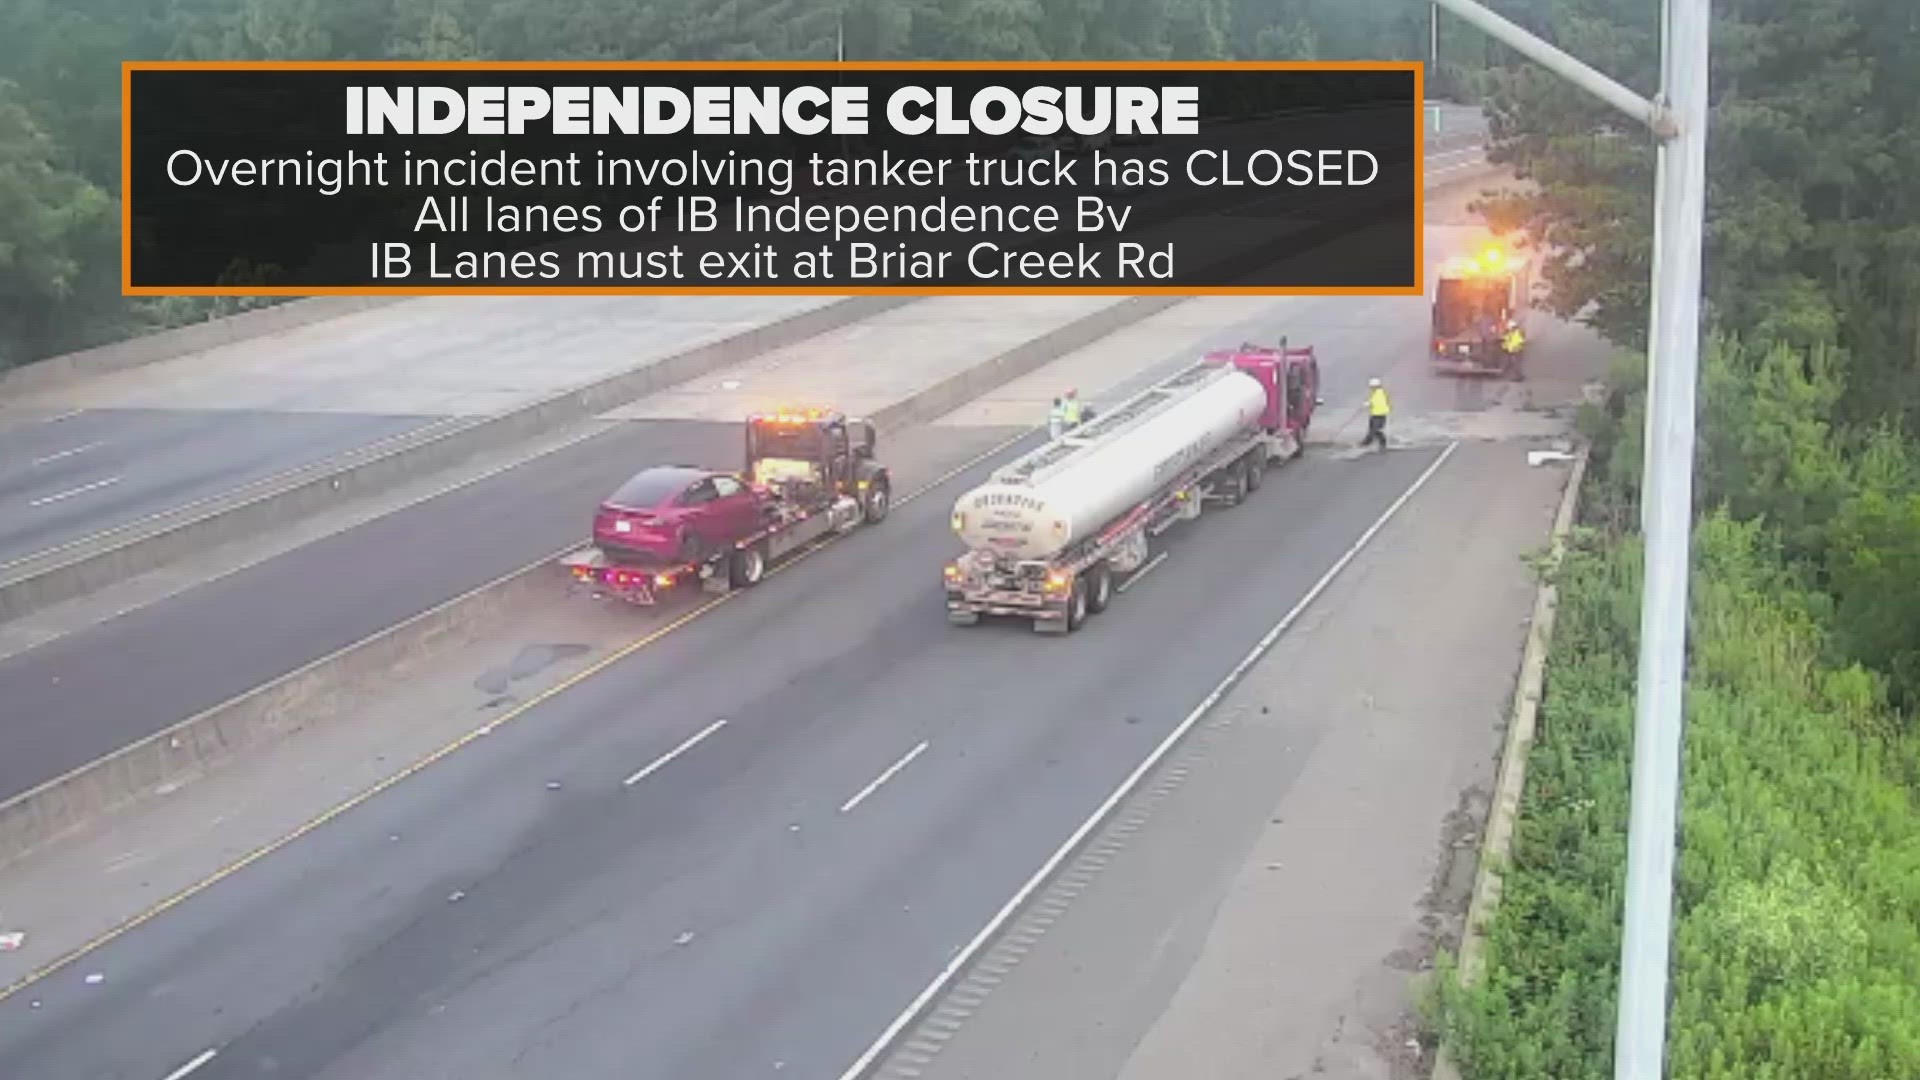 A crash involving a tanker truck shut down the inbound lanes of Independence Boulevard early Friday morning, causing major headaches for drivers.